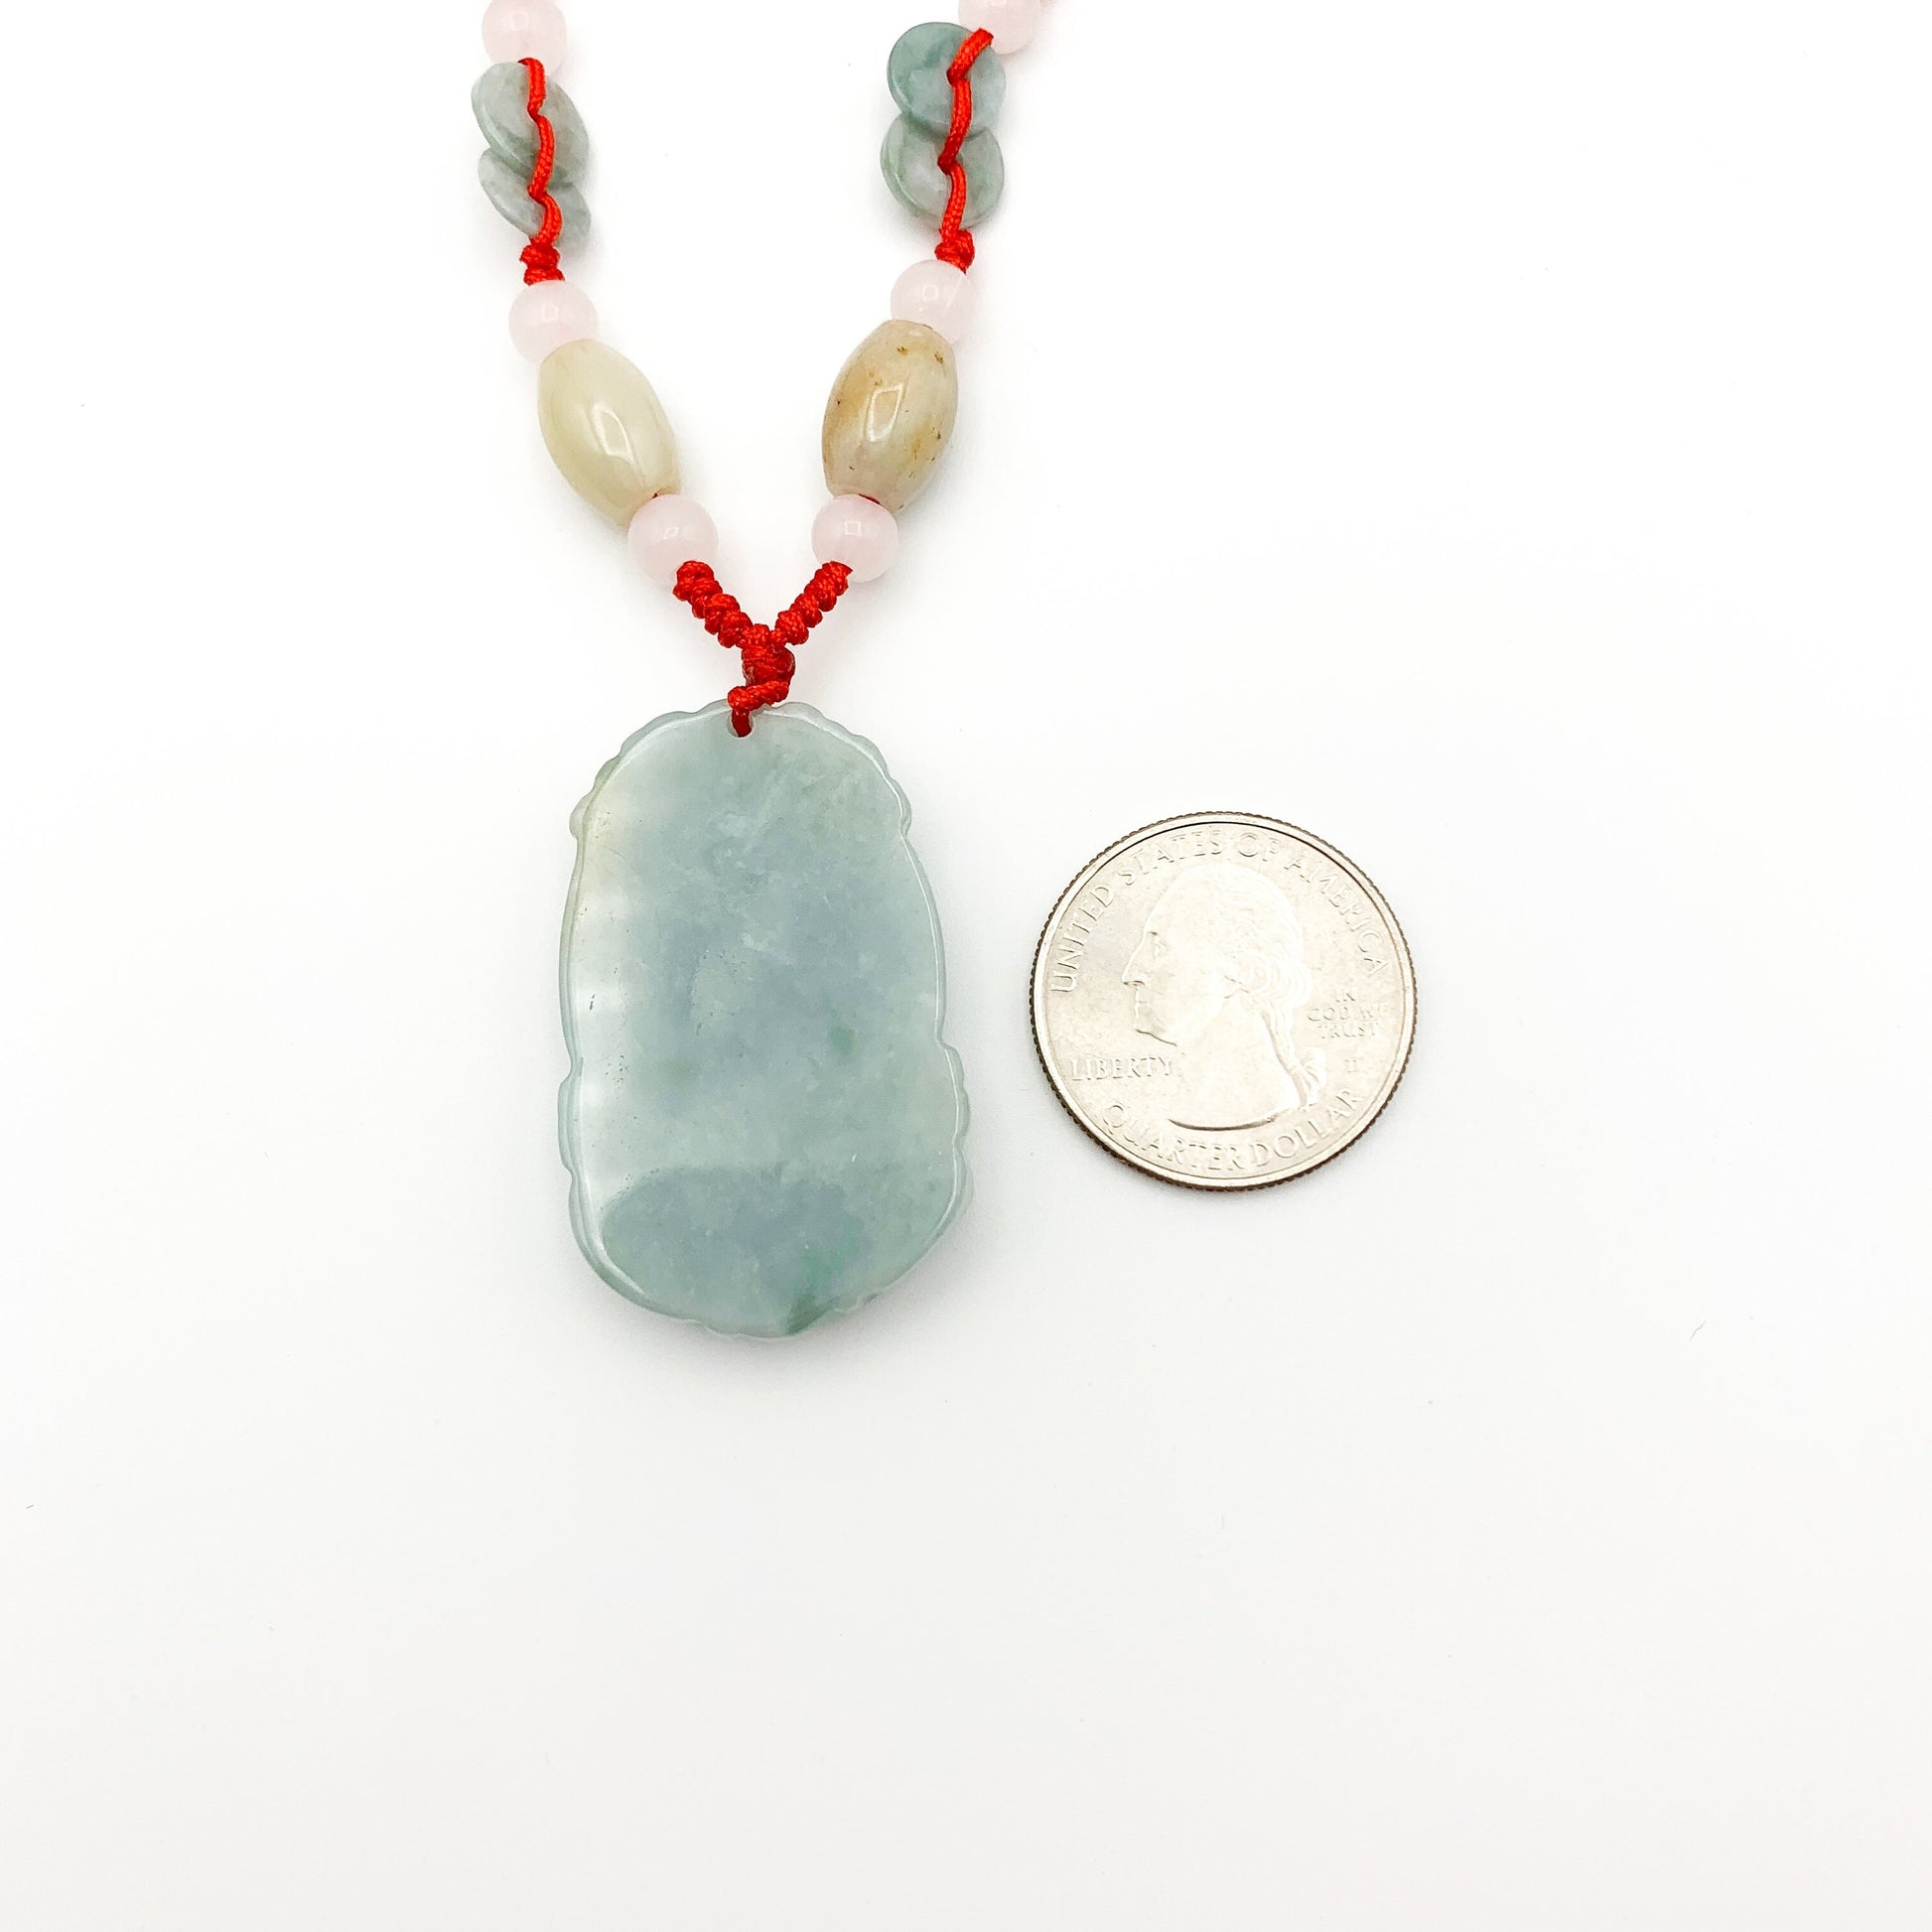 Red Jadeite Jade Dragon Chinese Zodiac Carved Pendant Necklace, YW-0110-1646195123 - AriaDesignCollection